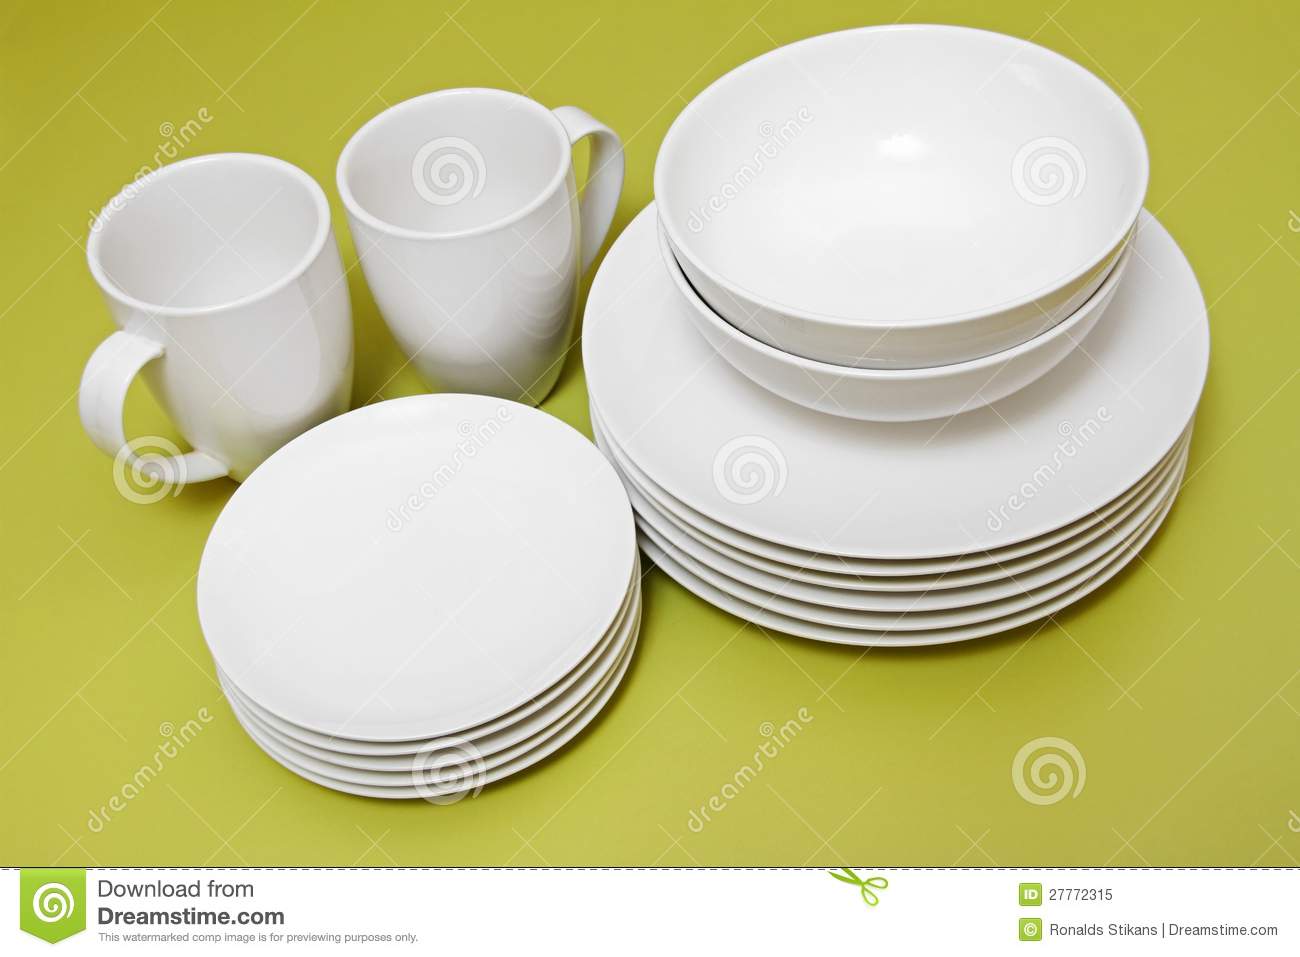 Clean Plates Bowls And Cups Royalty Free Stock Photo   Image  27772315